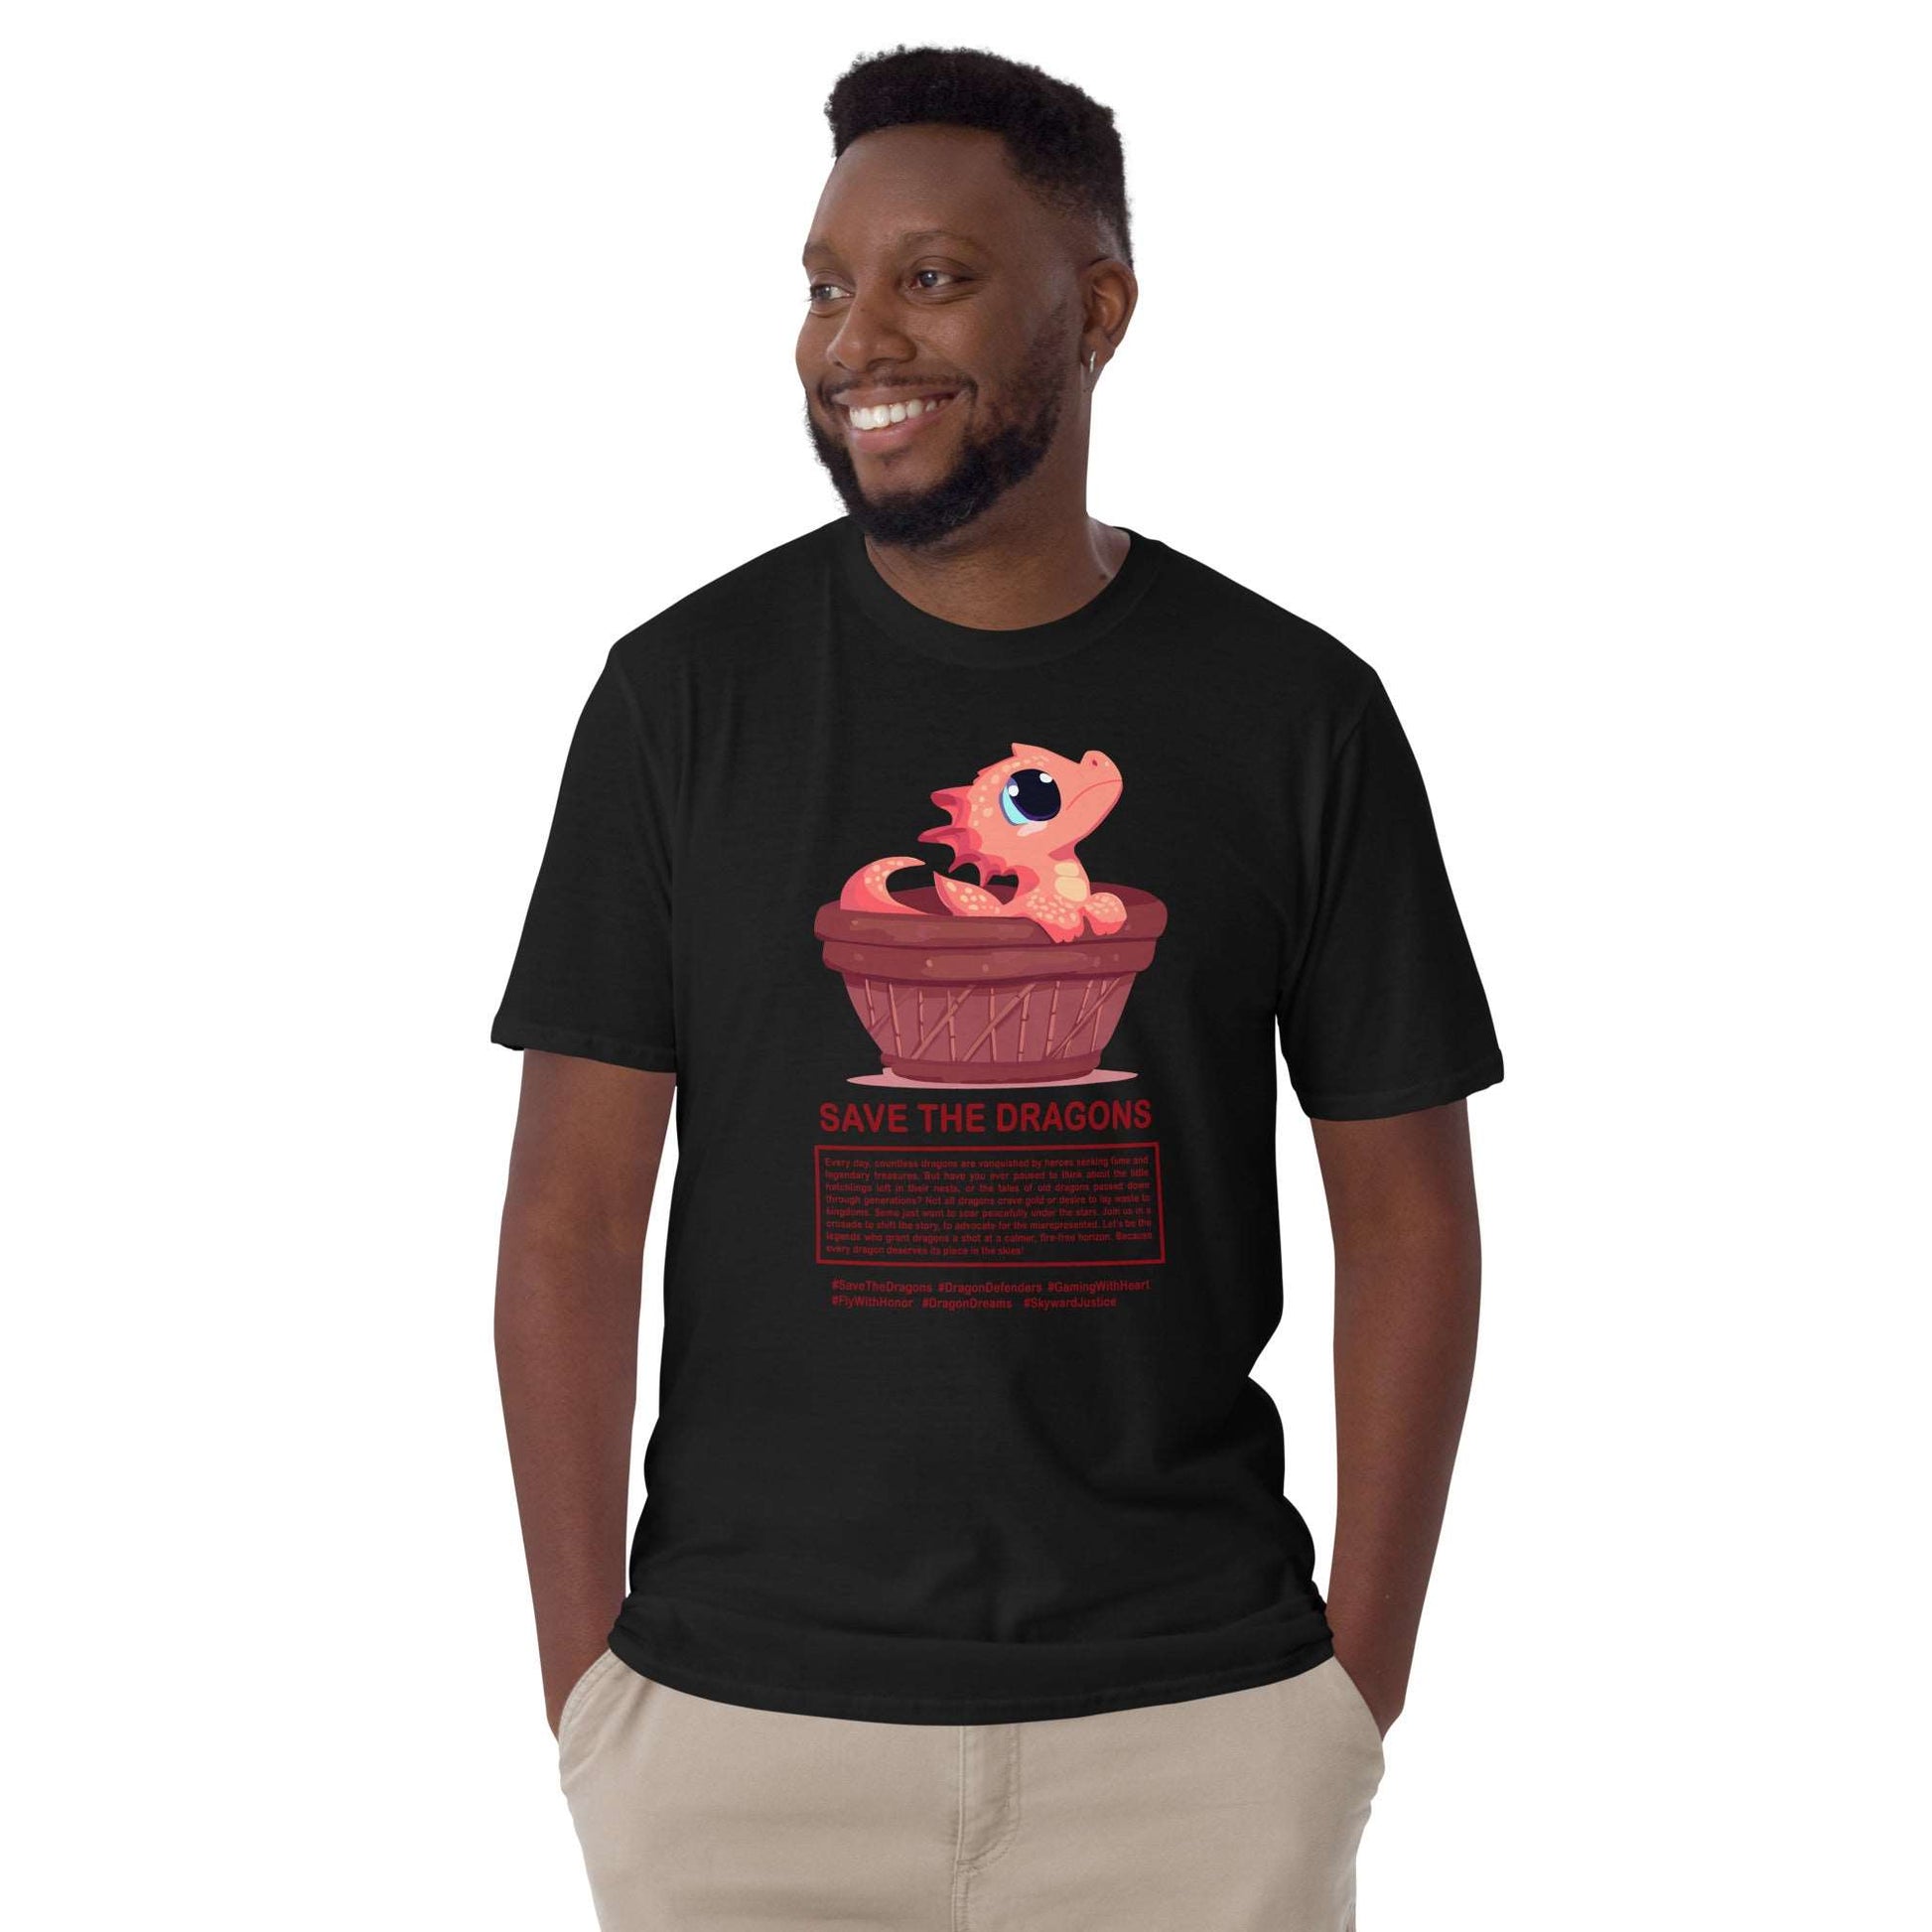 Save the Dragons - Hatchling Advocate T Shirt